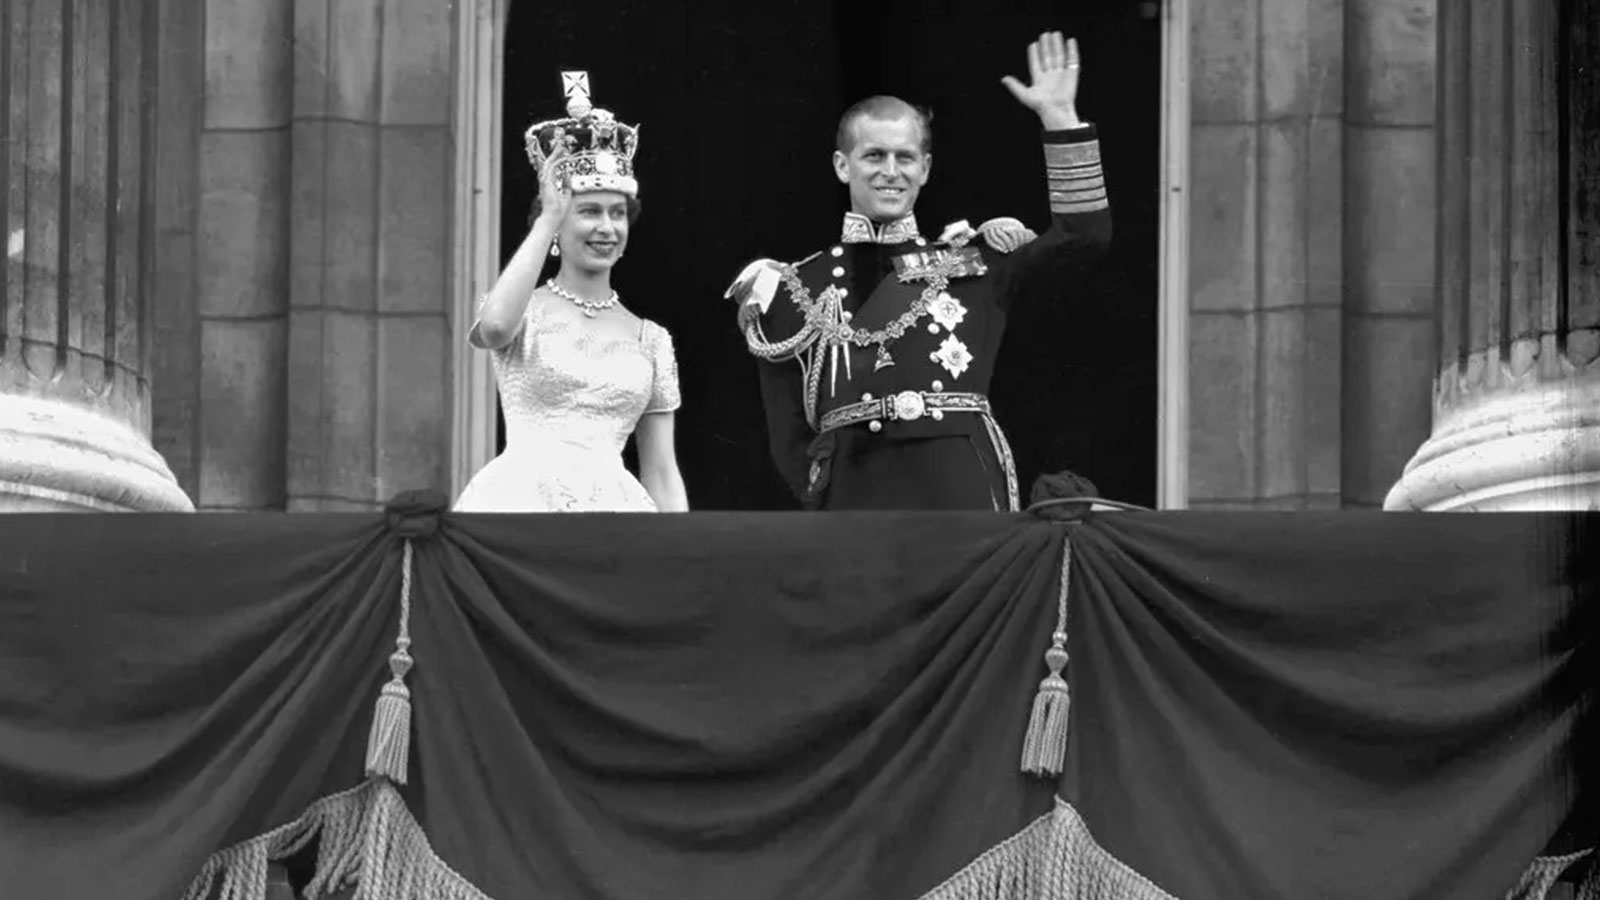 After her coronation at Westminster Abbey in 1953, journalists and commentators promptly cast the 25-year-old queen as a phoenix rising into a new Elizabethan age. 